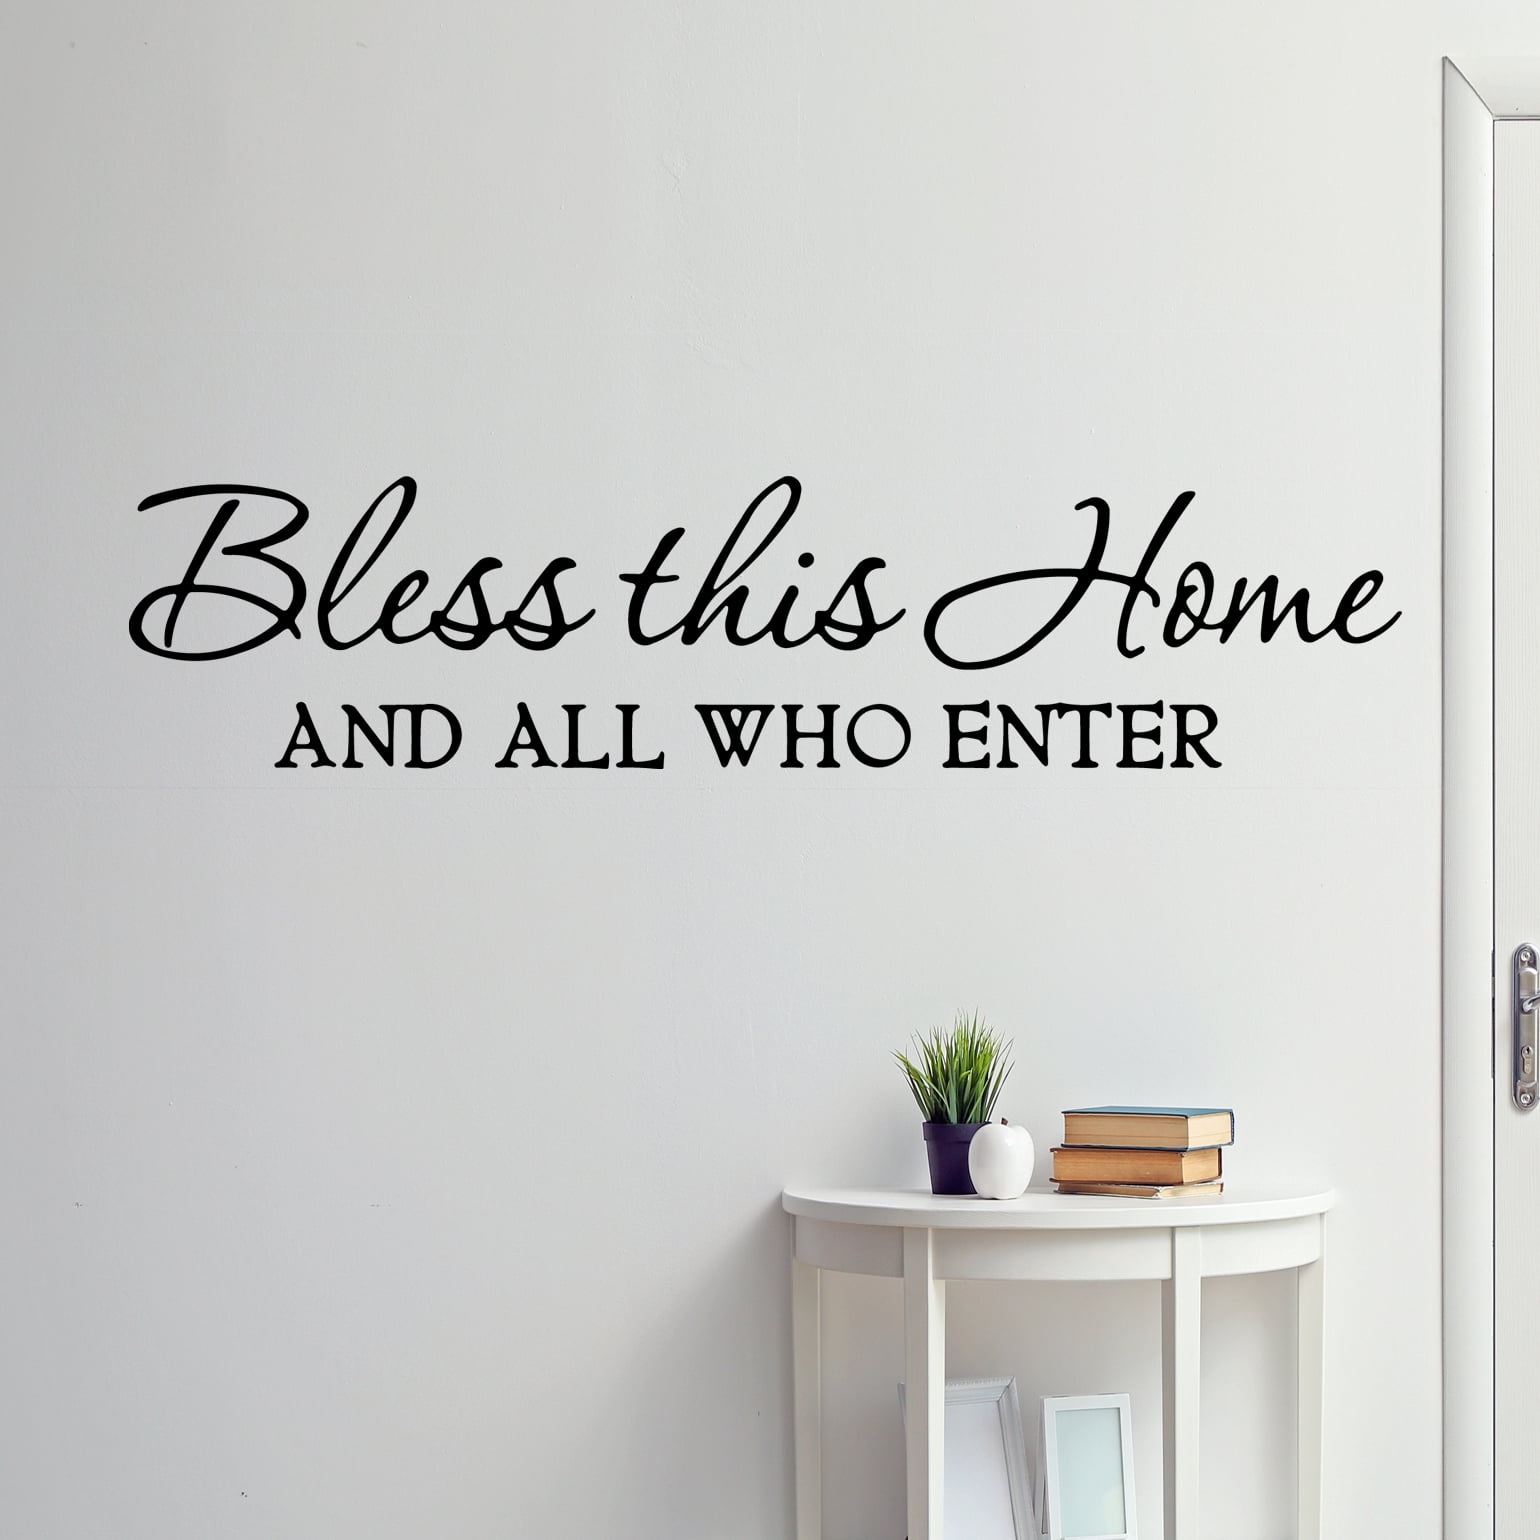 Bless This Home Wall Sticker Home Quotes Inspirational Love MS217VC